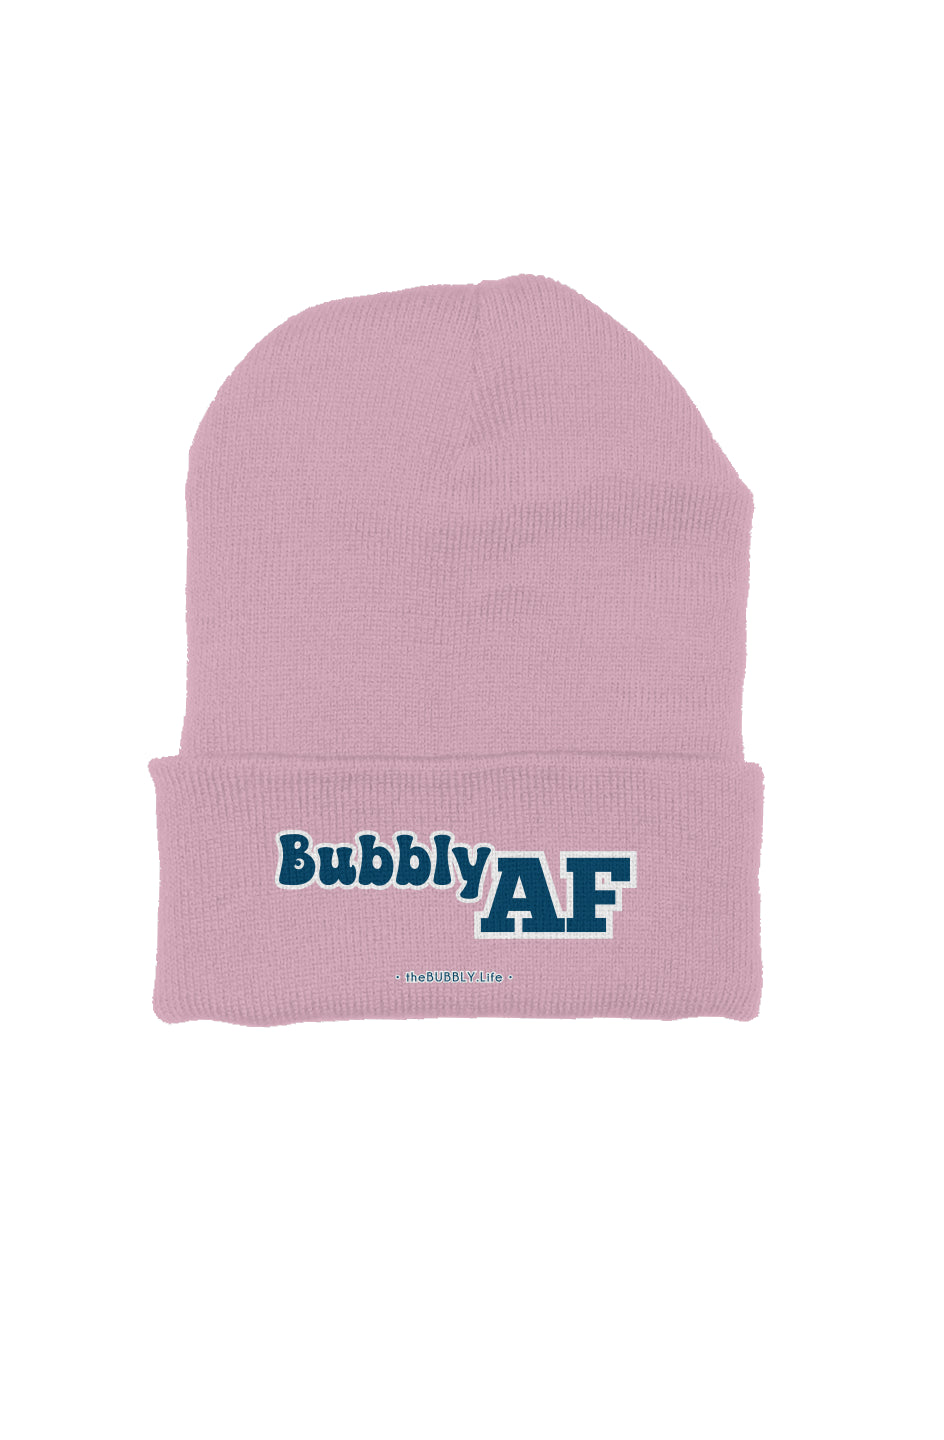 BUBBLYAF PINK Embroidered Beanie